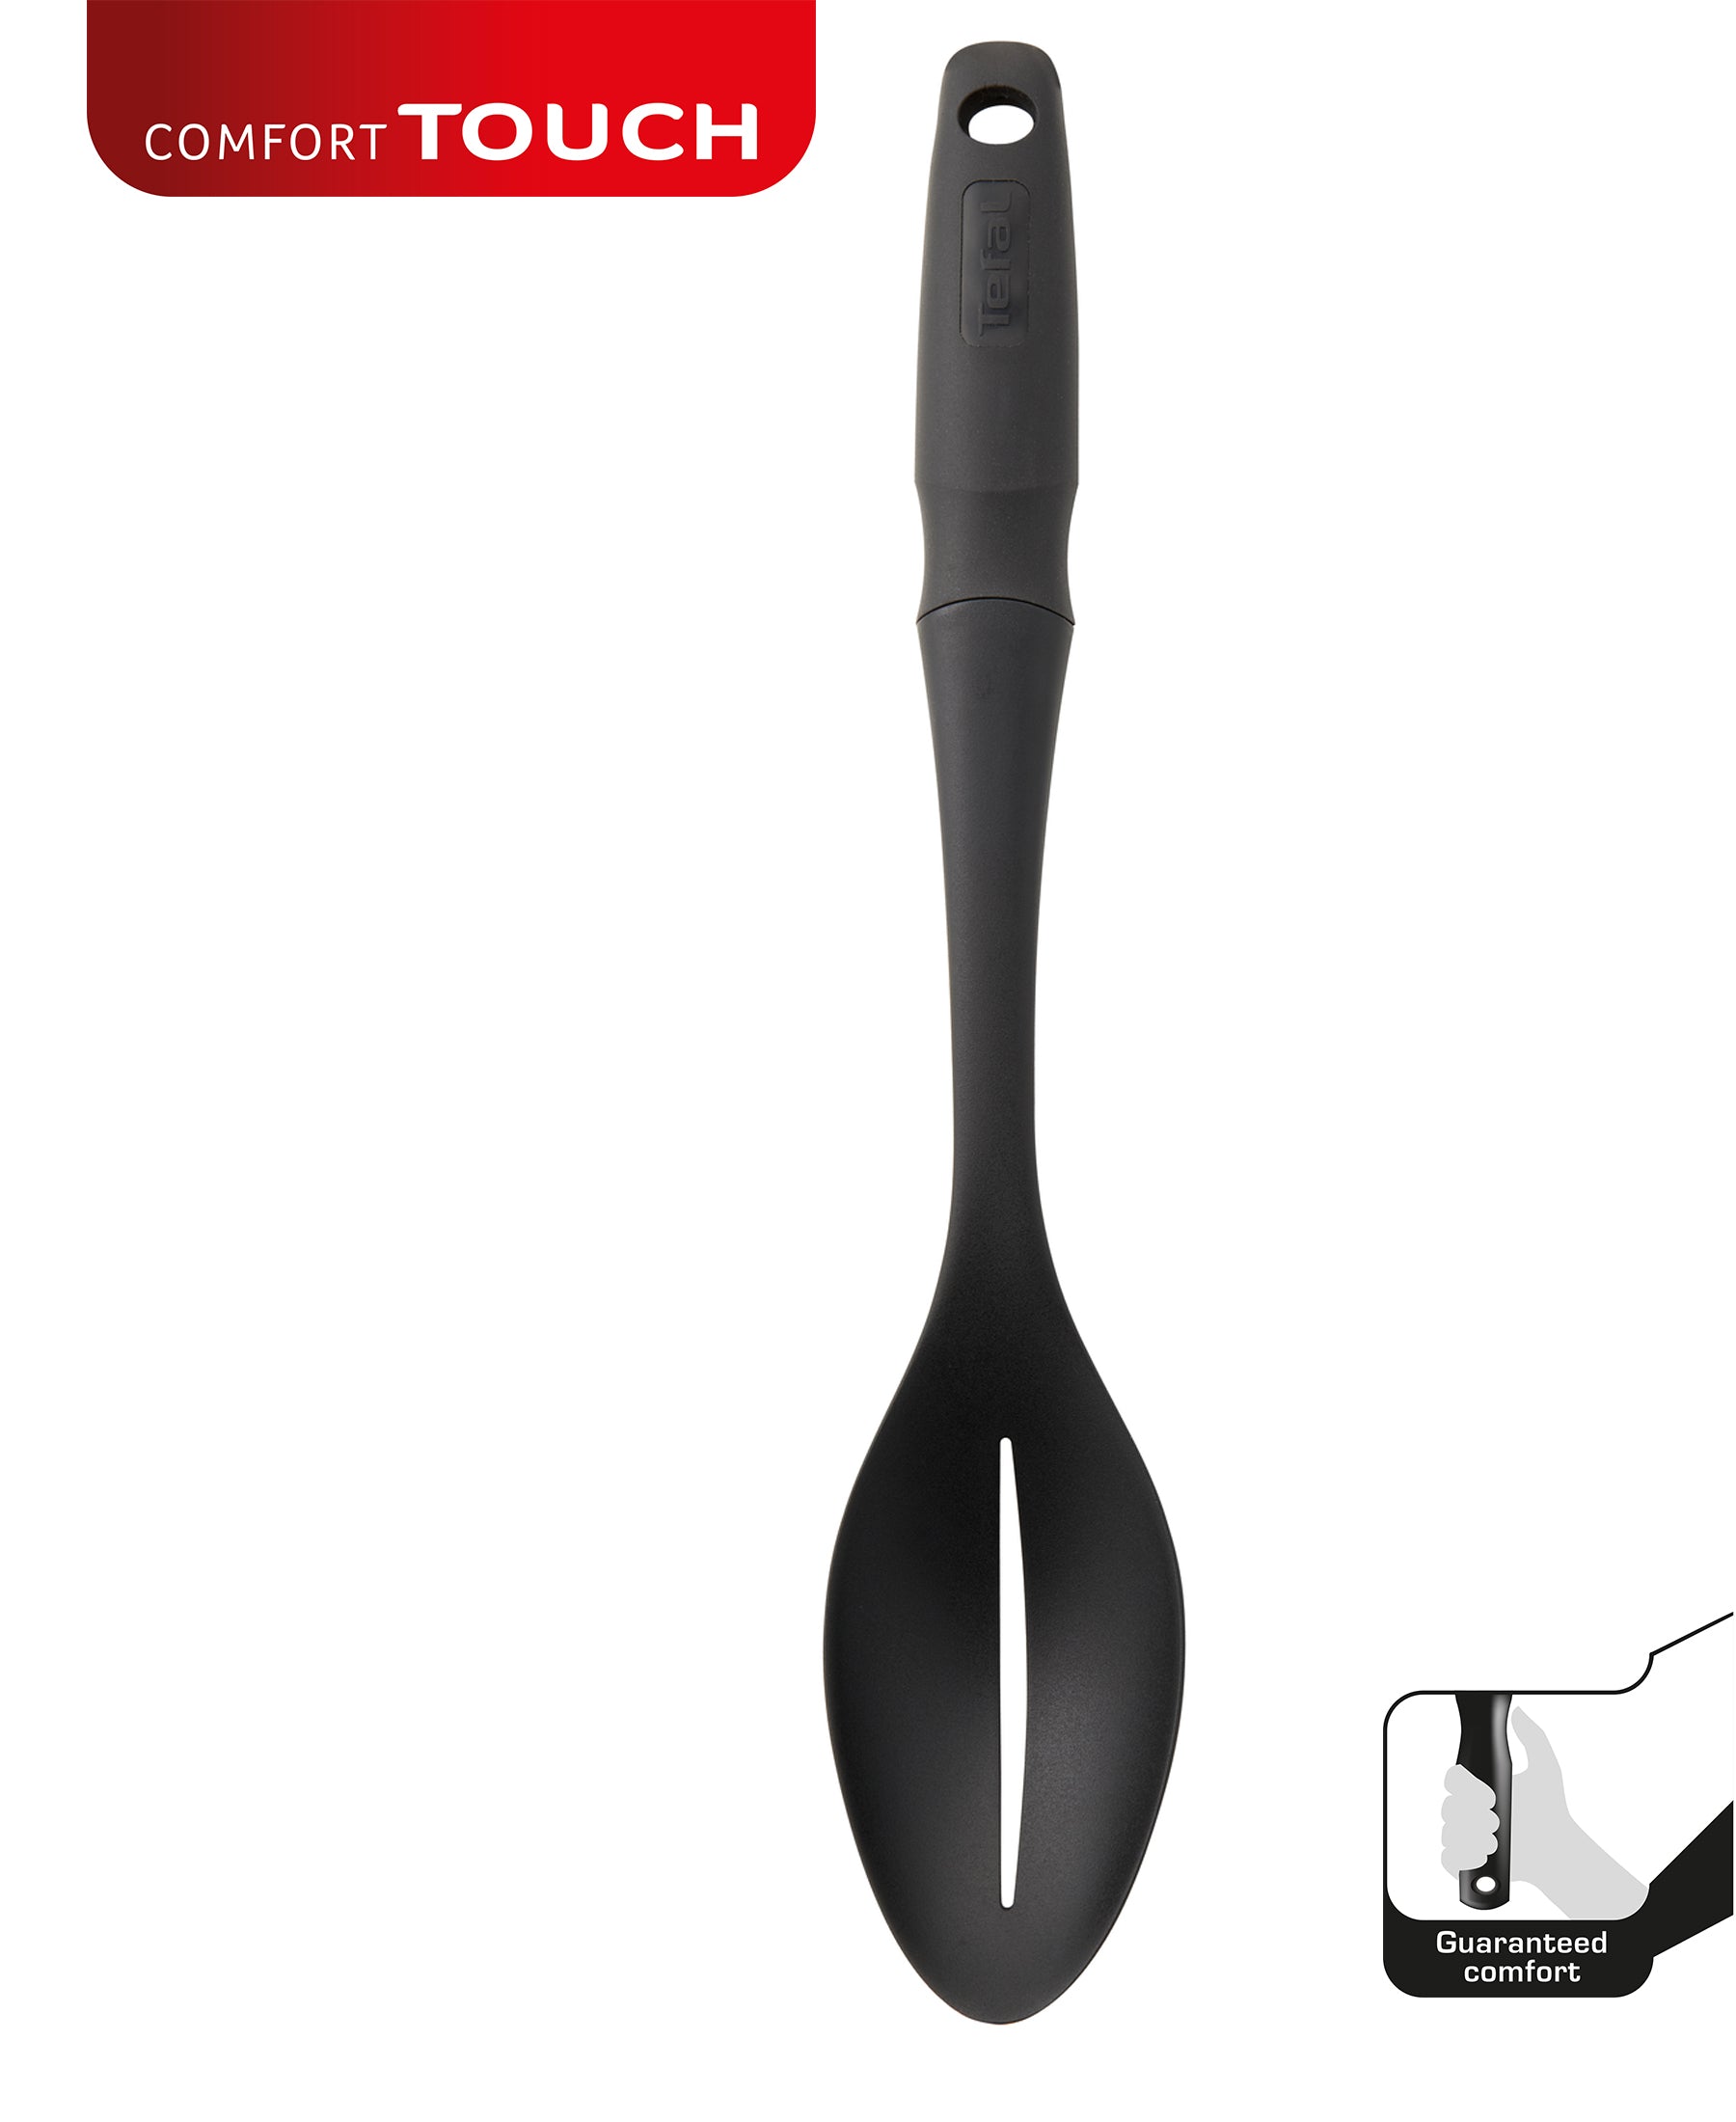 Tefal Comfort Touch Slotted Spoon - Black